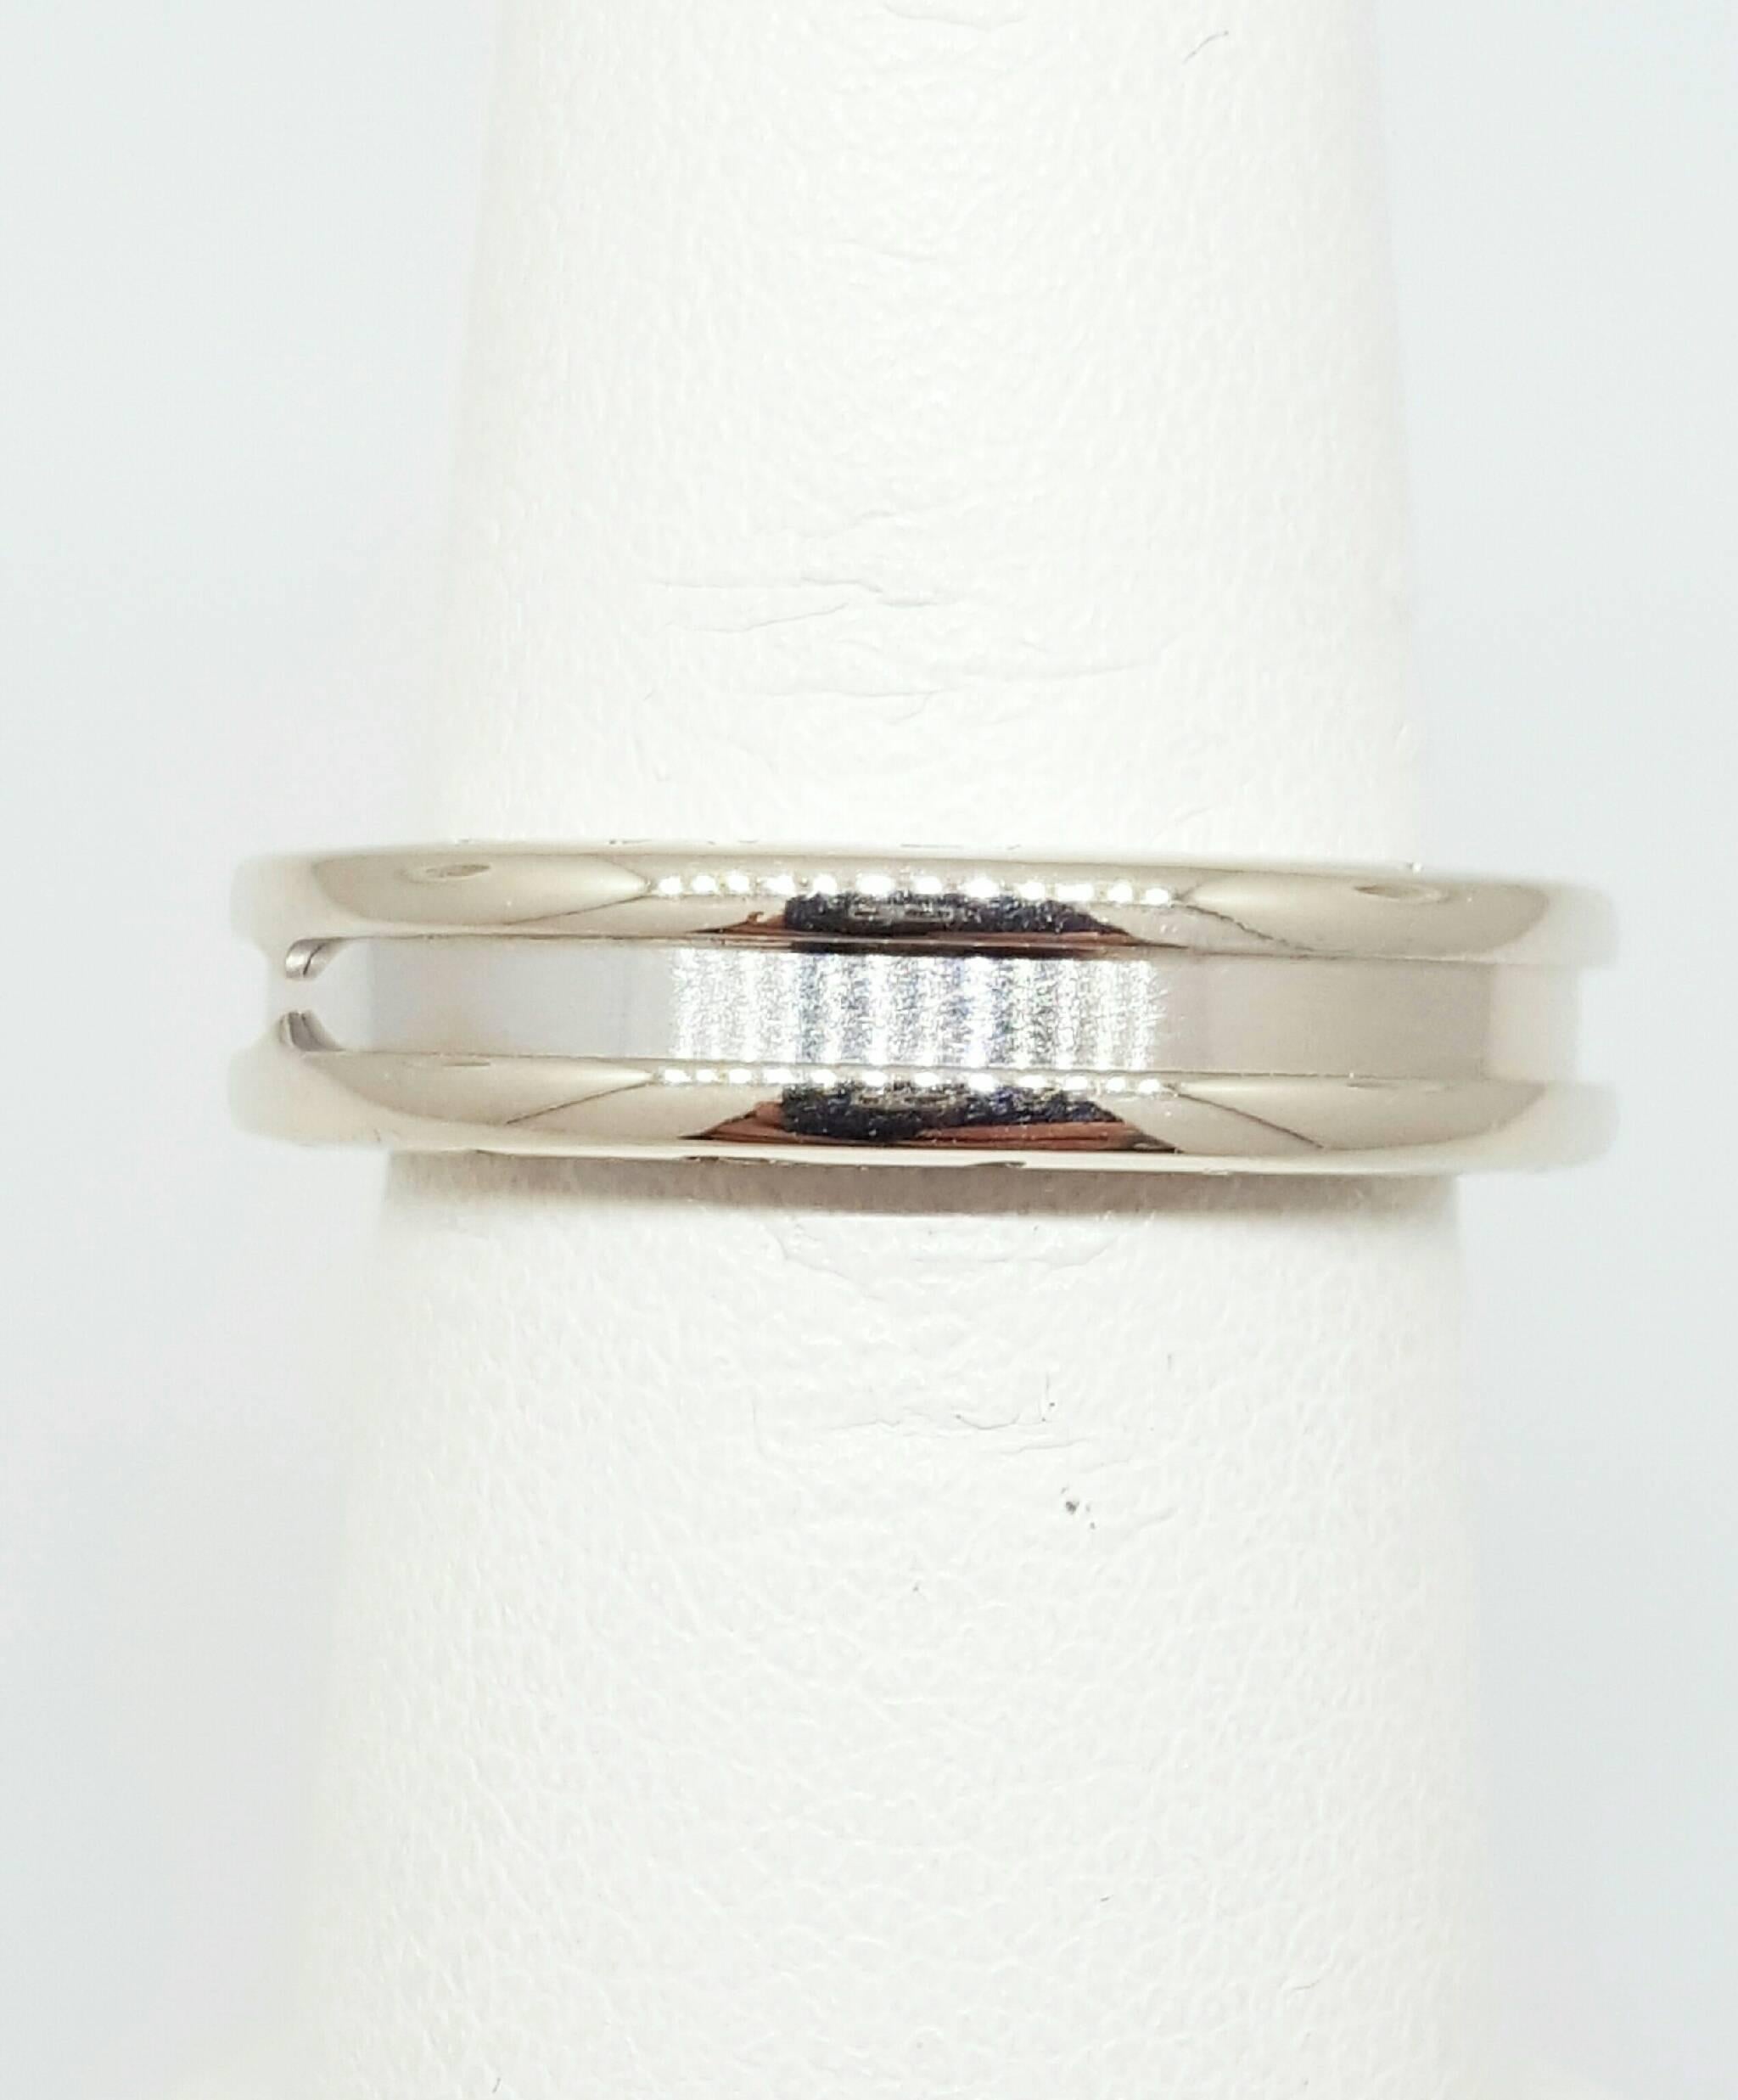 An 18 karat white gold Bvlgari B.Zero1 ring. The ring is 5.0mm in diameter and is a size 6.5. The ring is embossed with Bvlgari on both sides and is stamped "Bvlgari 750" on the inside with authentic Bvlgari serial numbers. 